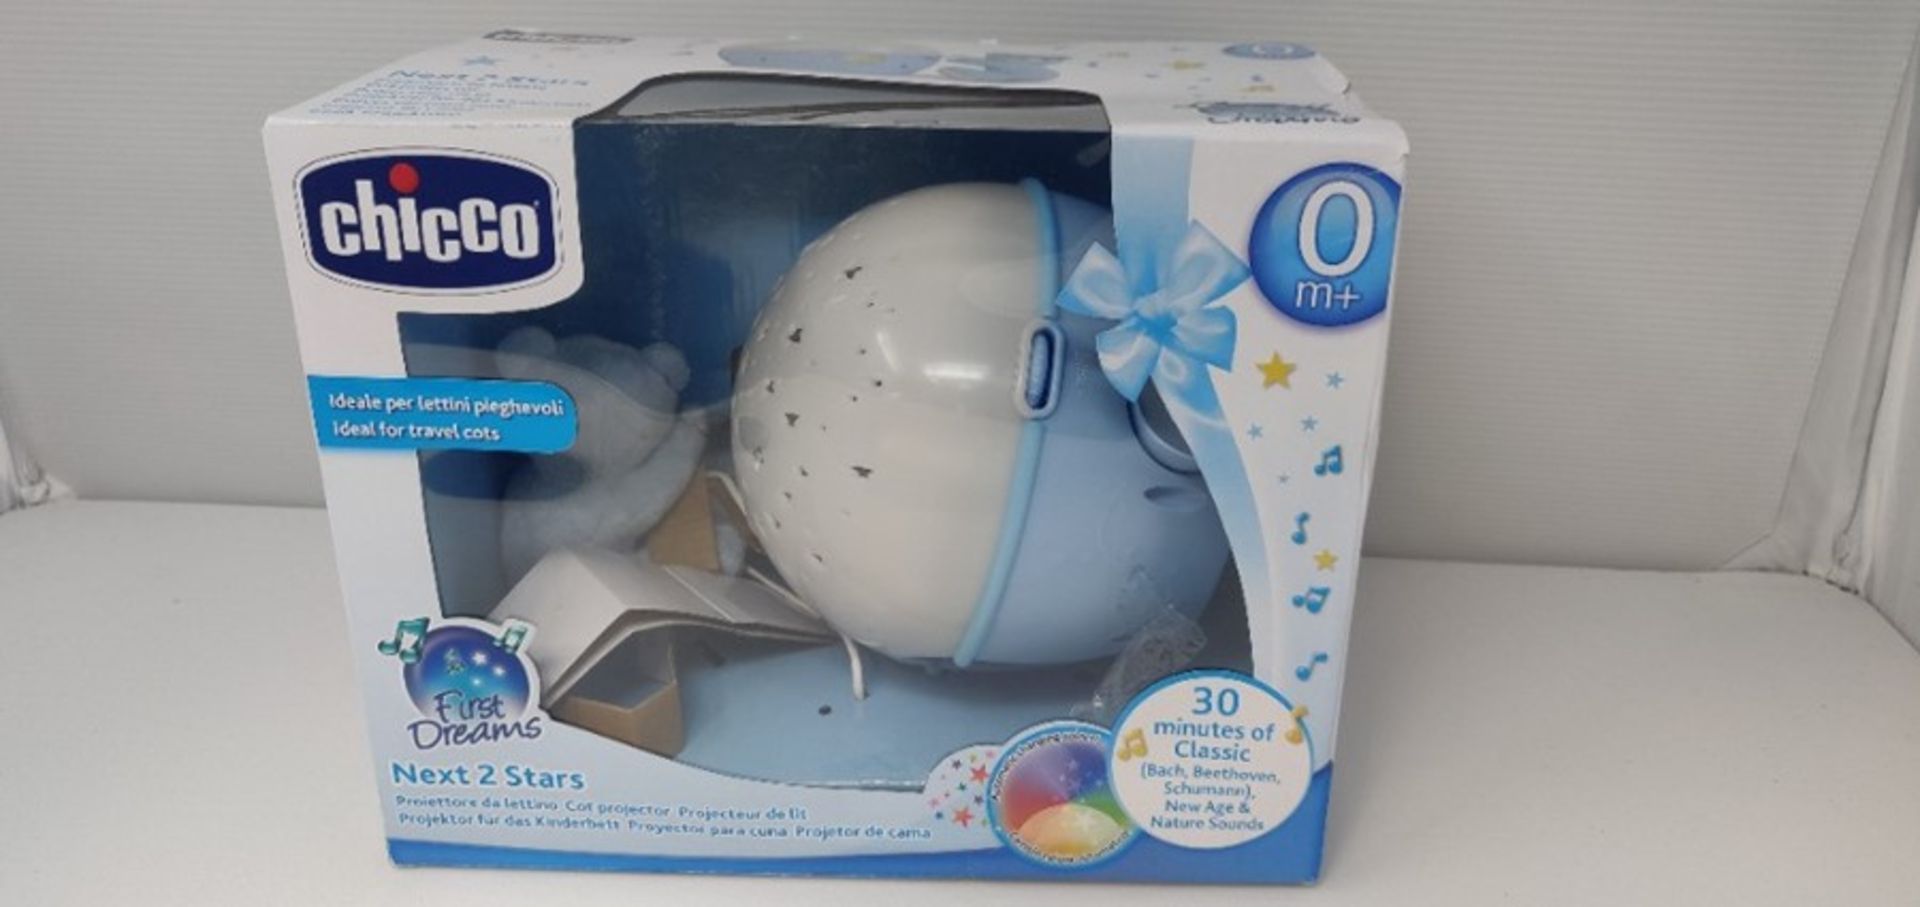 Chicco Next2Stars Baby Night Light with Plush Toy - Star Light Projector for Cots and - Image 2 of 2